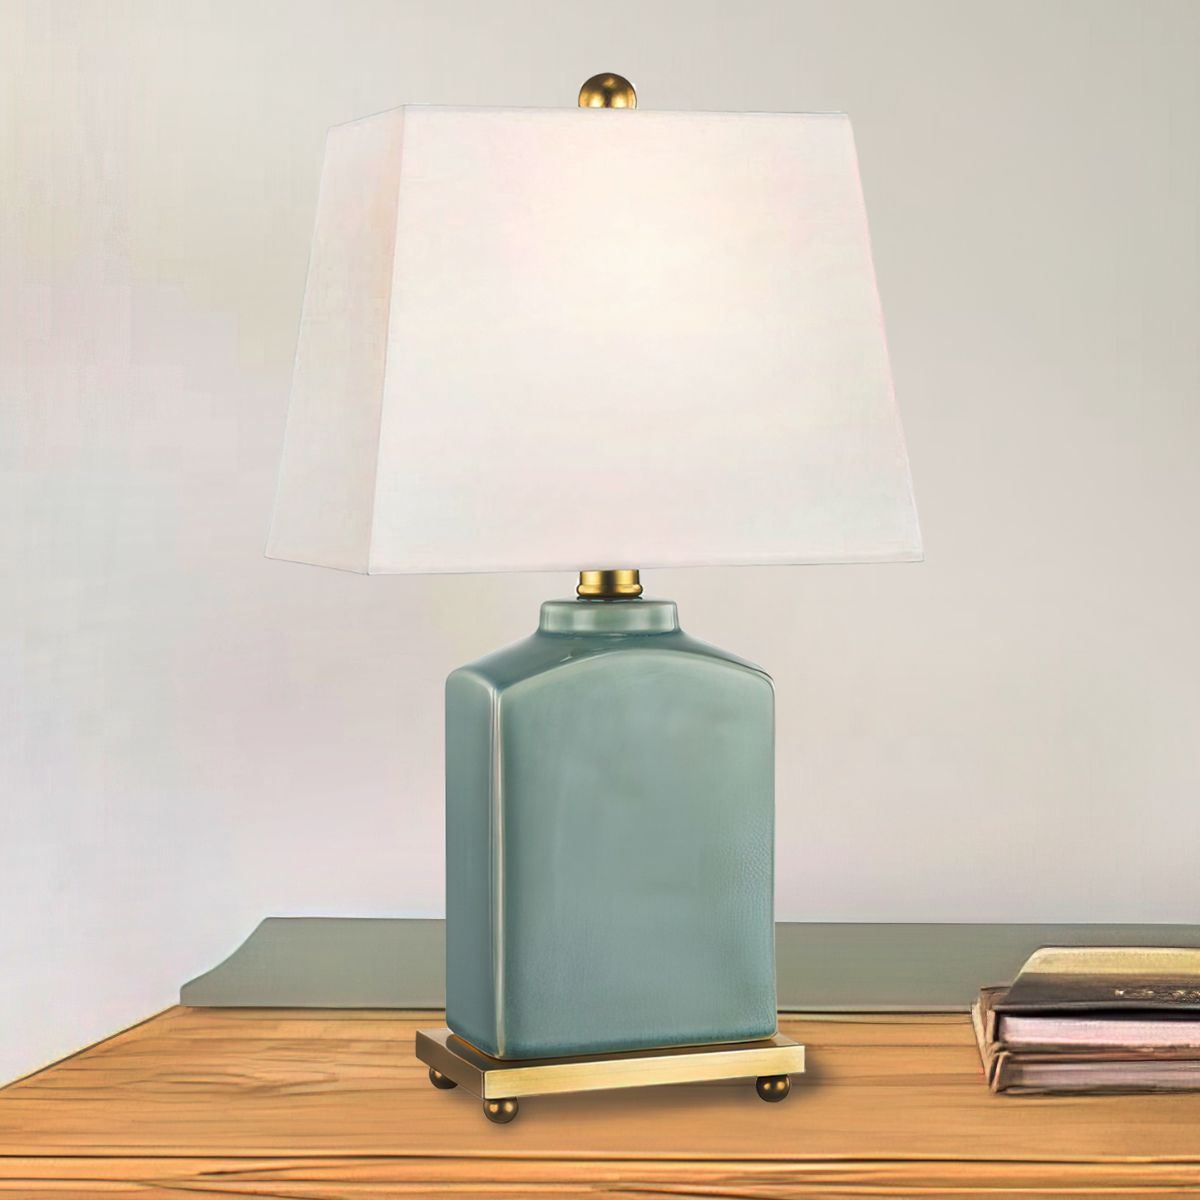 Brynn Table Lamp with Brass Accents